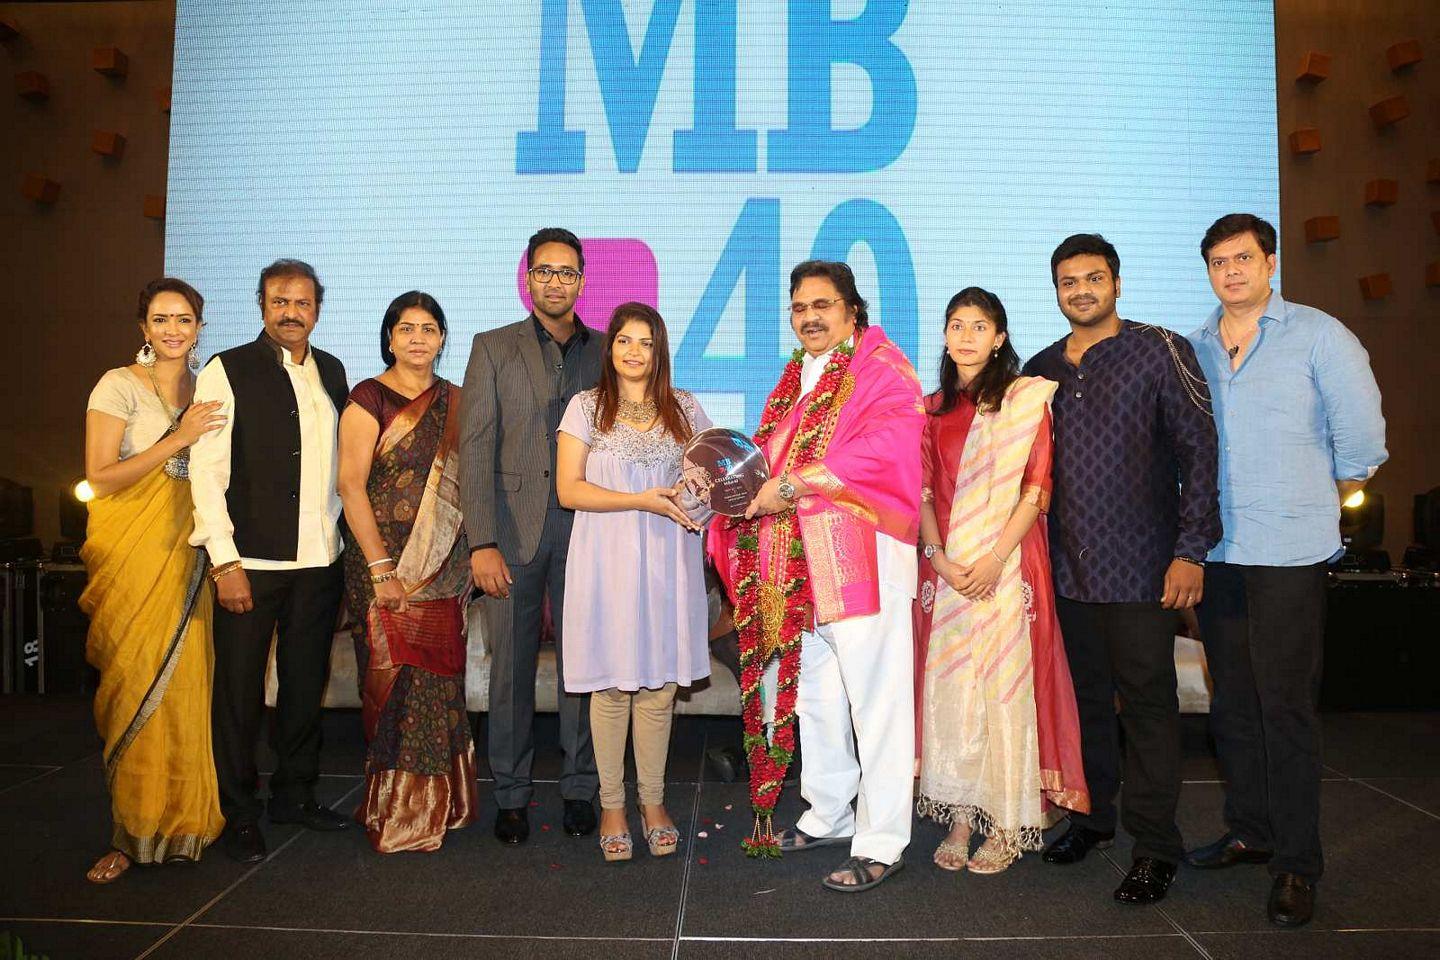 Mohan Babu Completes 40 years As an actor